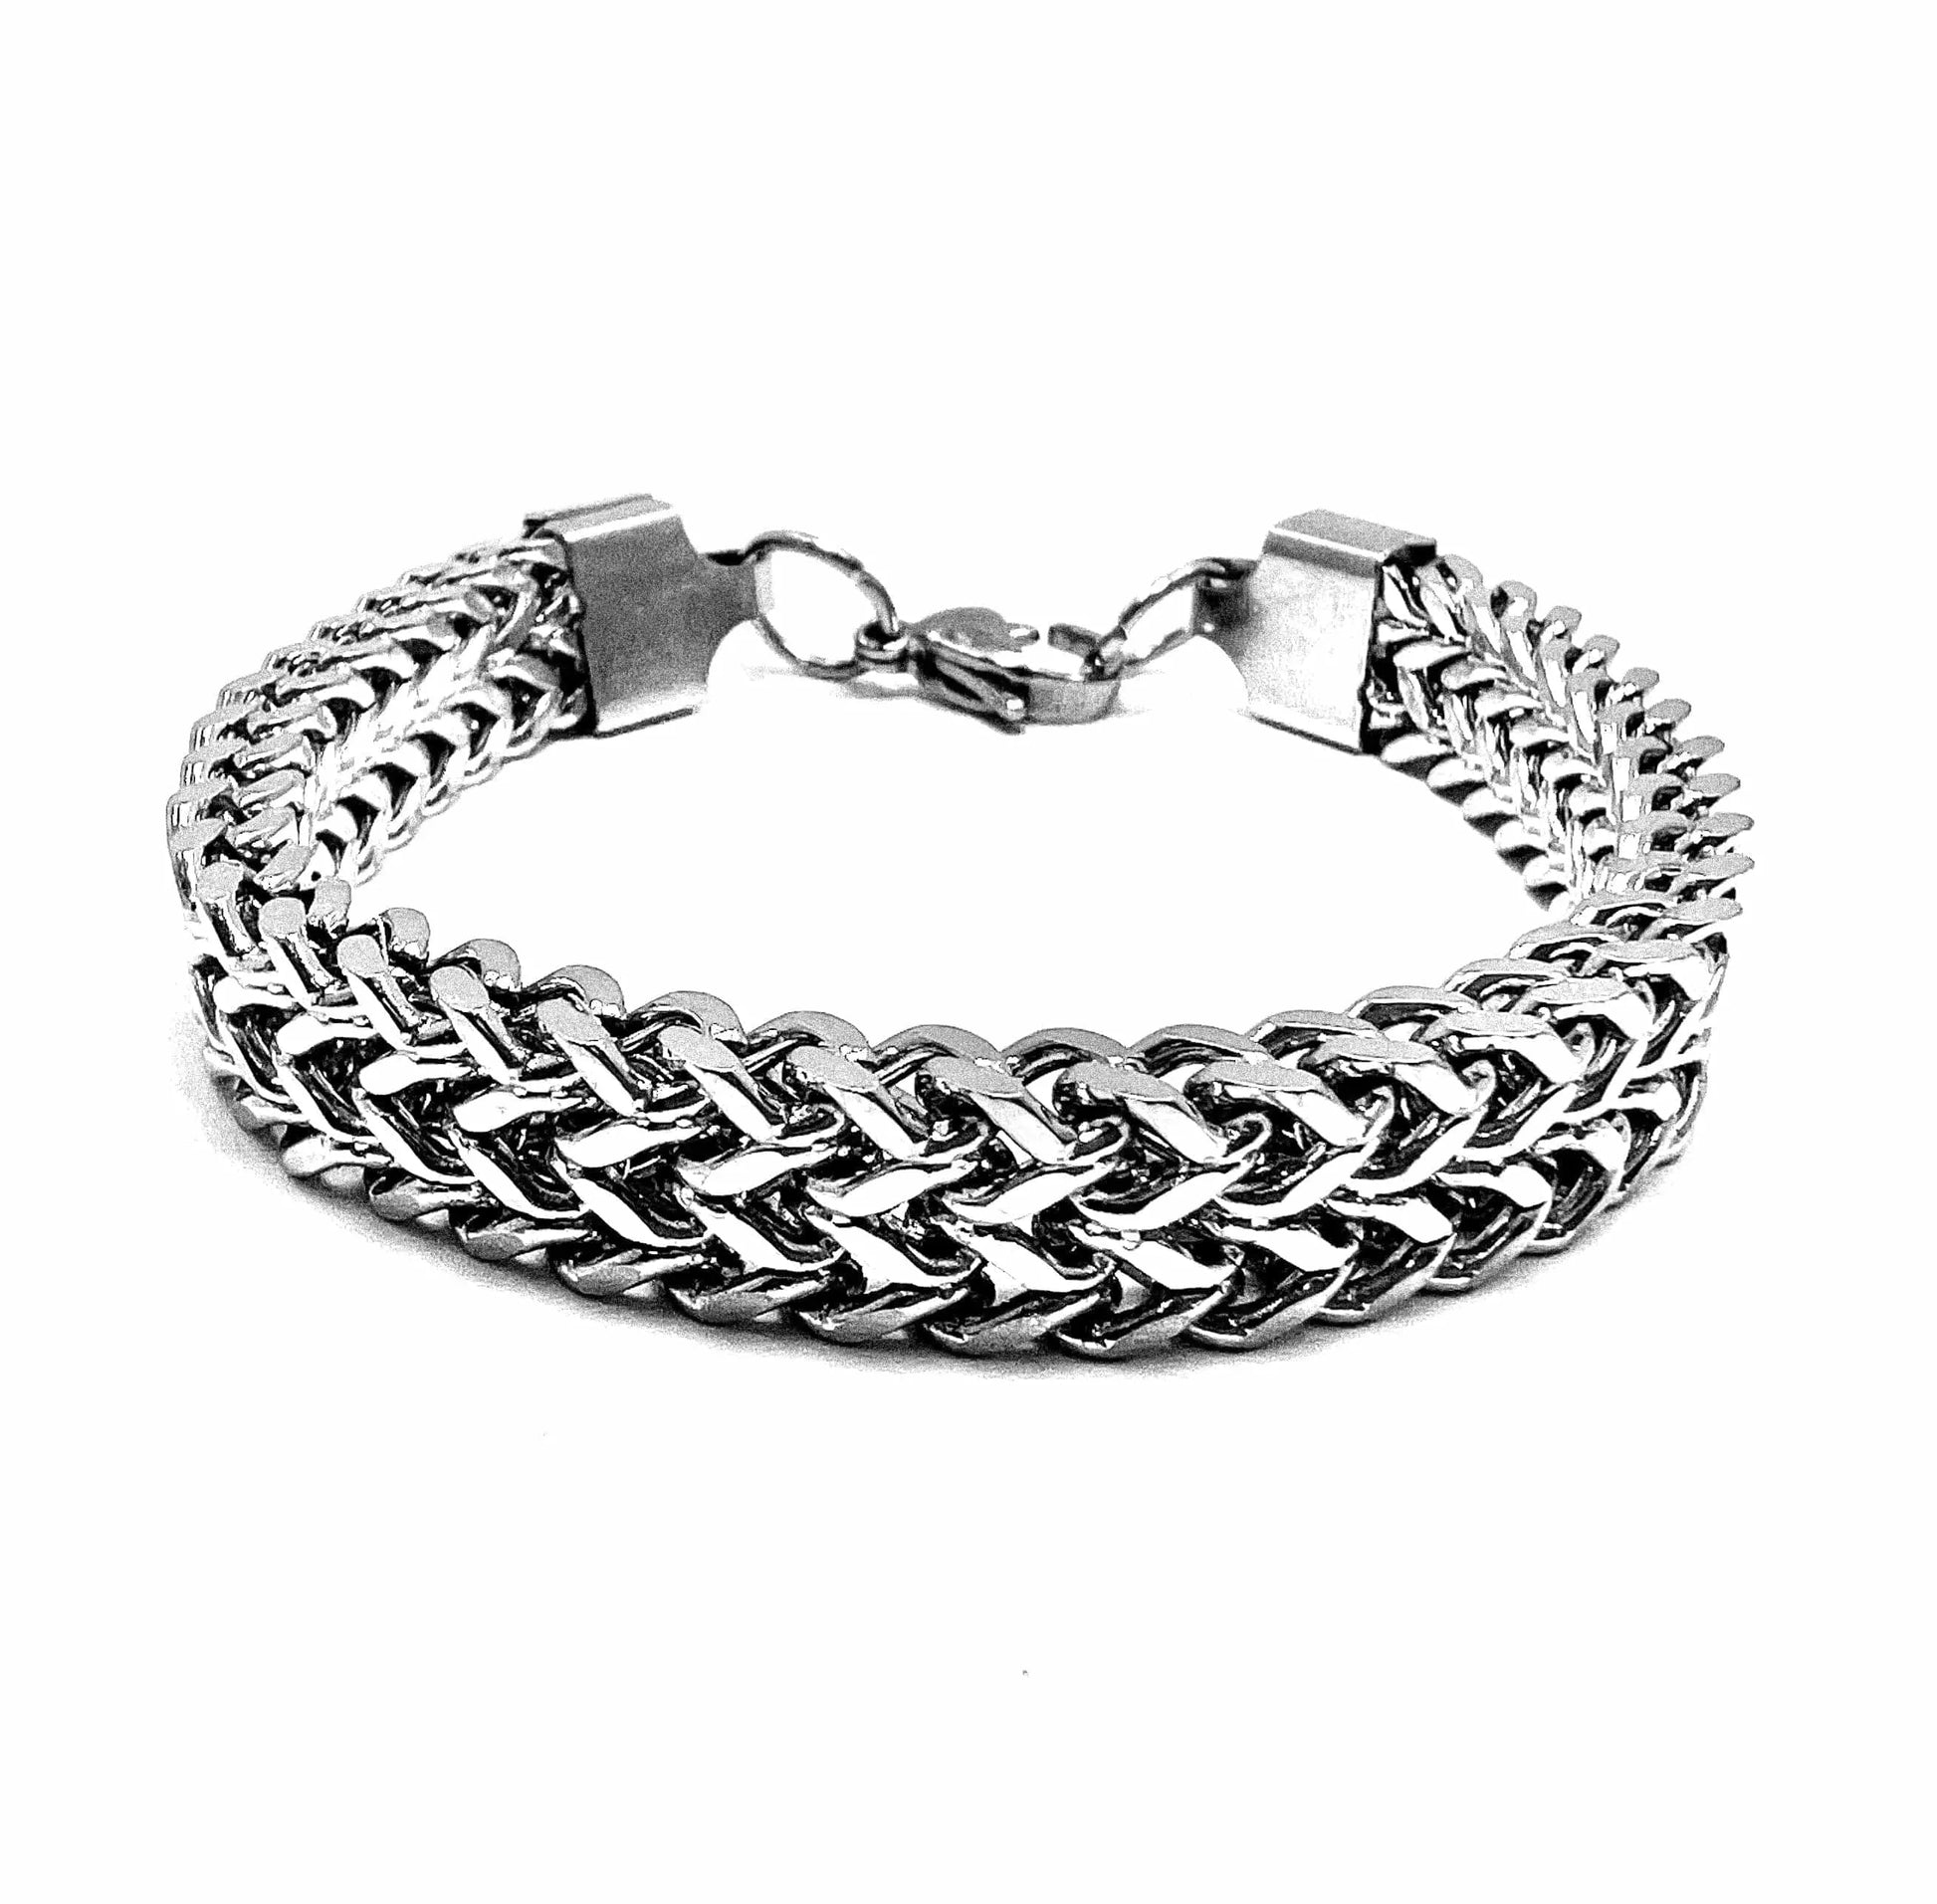 THE MEN THING Pure Stainless Steel Italian trending Style, double-layer thick Bracelet 7 inch with Lobster Claw Buckle for Men & Boy (10mm)